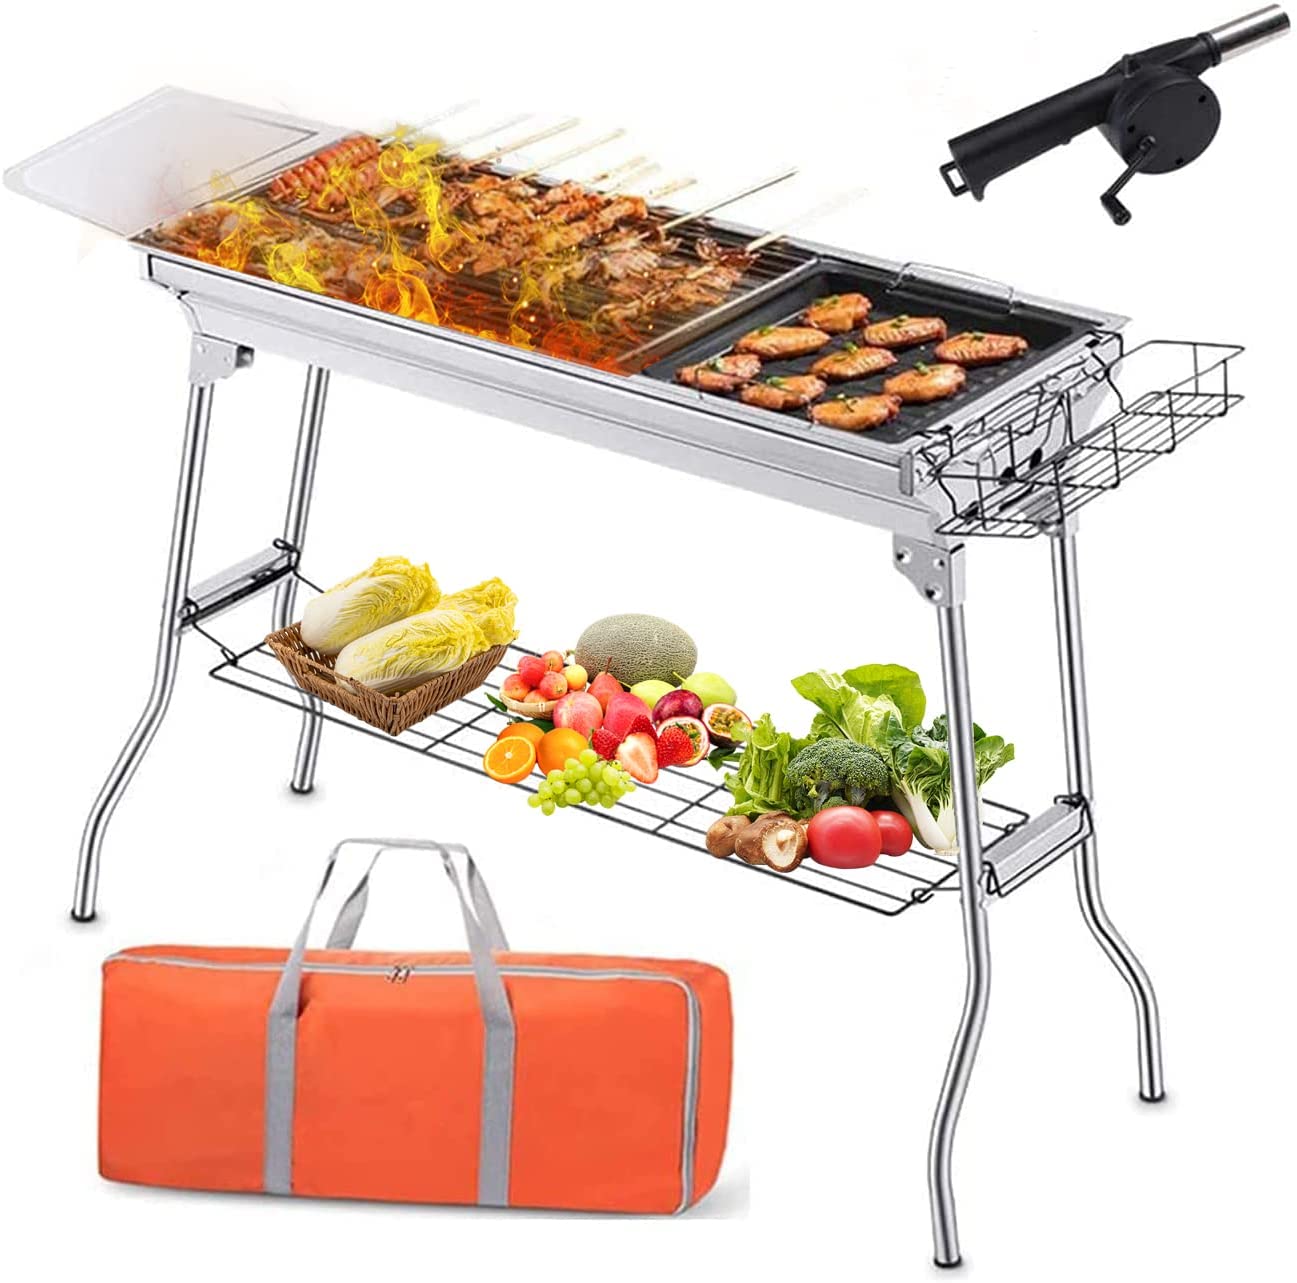 Best large portable yakitori charcoal grill for outdoor & camping: Fanousy Grill BBQ 